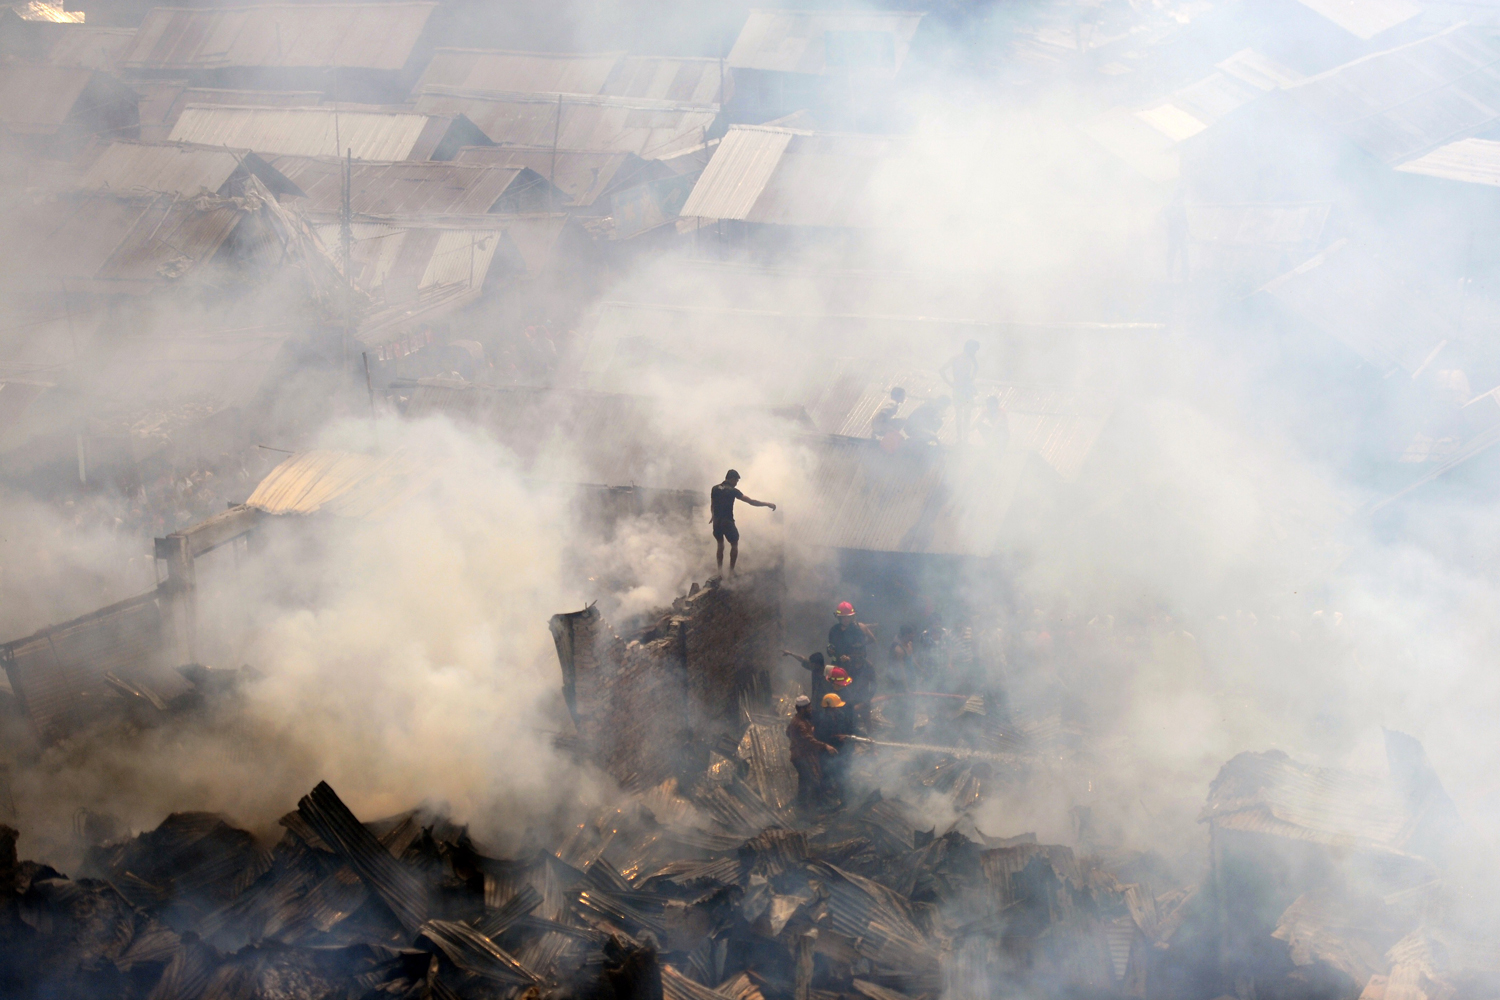 Feb. 27, 2013. Bangladeshi firefighters try to control a blaze at a slum in Dhaka. At least 300 shanties were gutted but no casualties were reported.